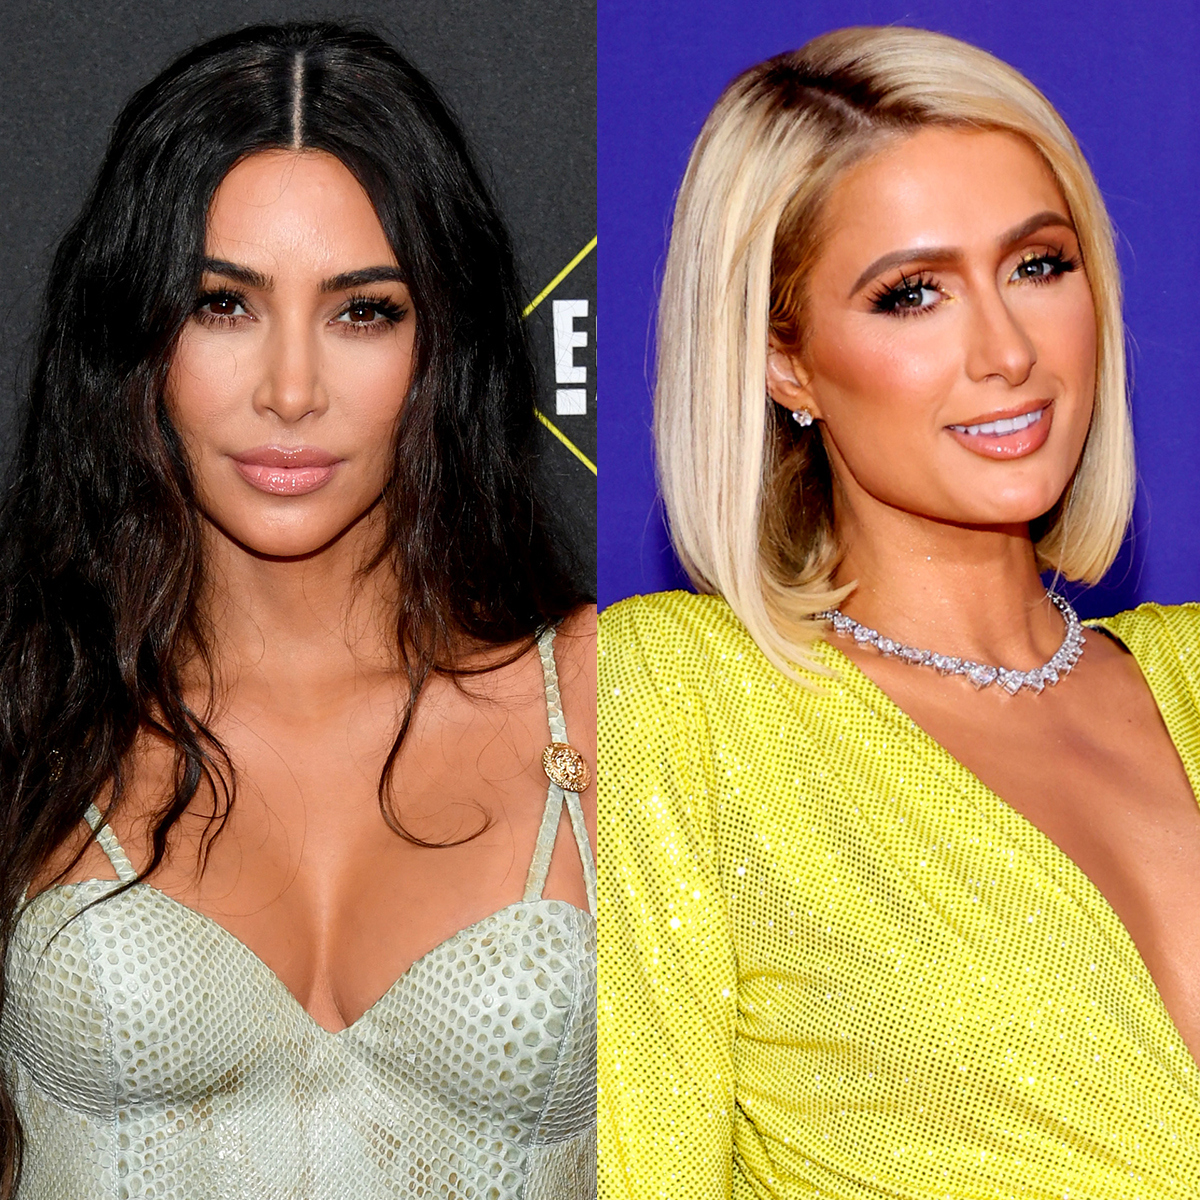 Kim Kardashian and Paris Hilton's ups and downs over the years